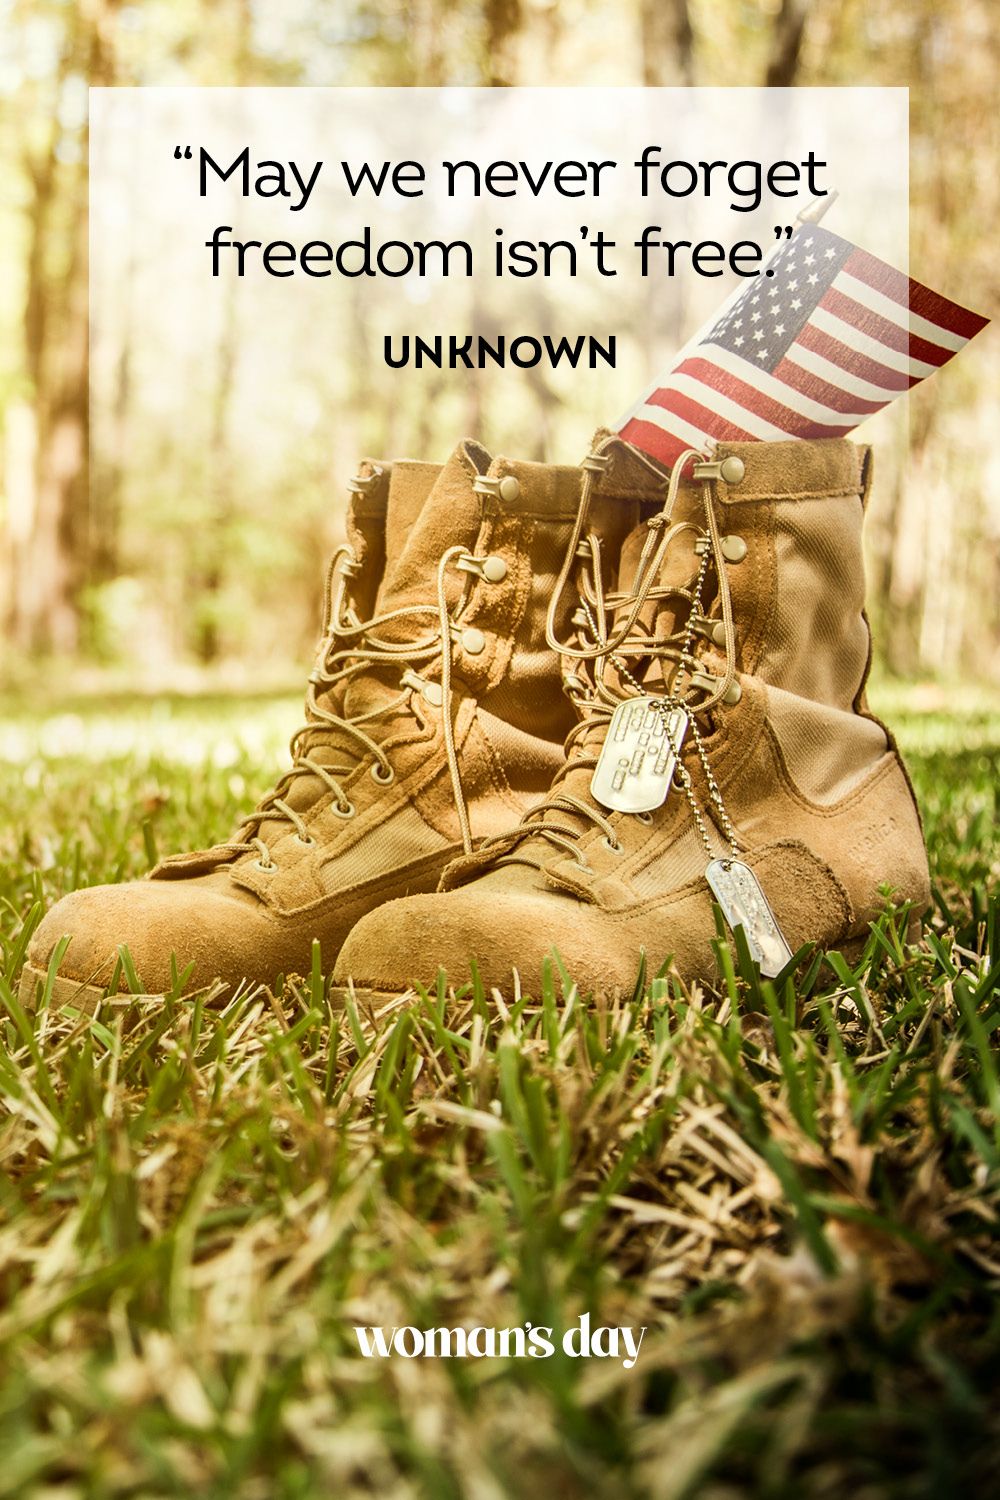 Quotes Sayings Best Memorial Day Images memmiblog